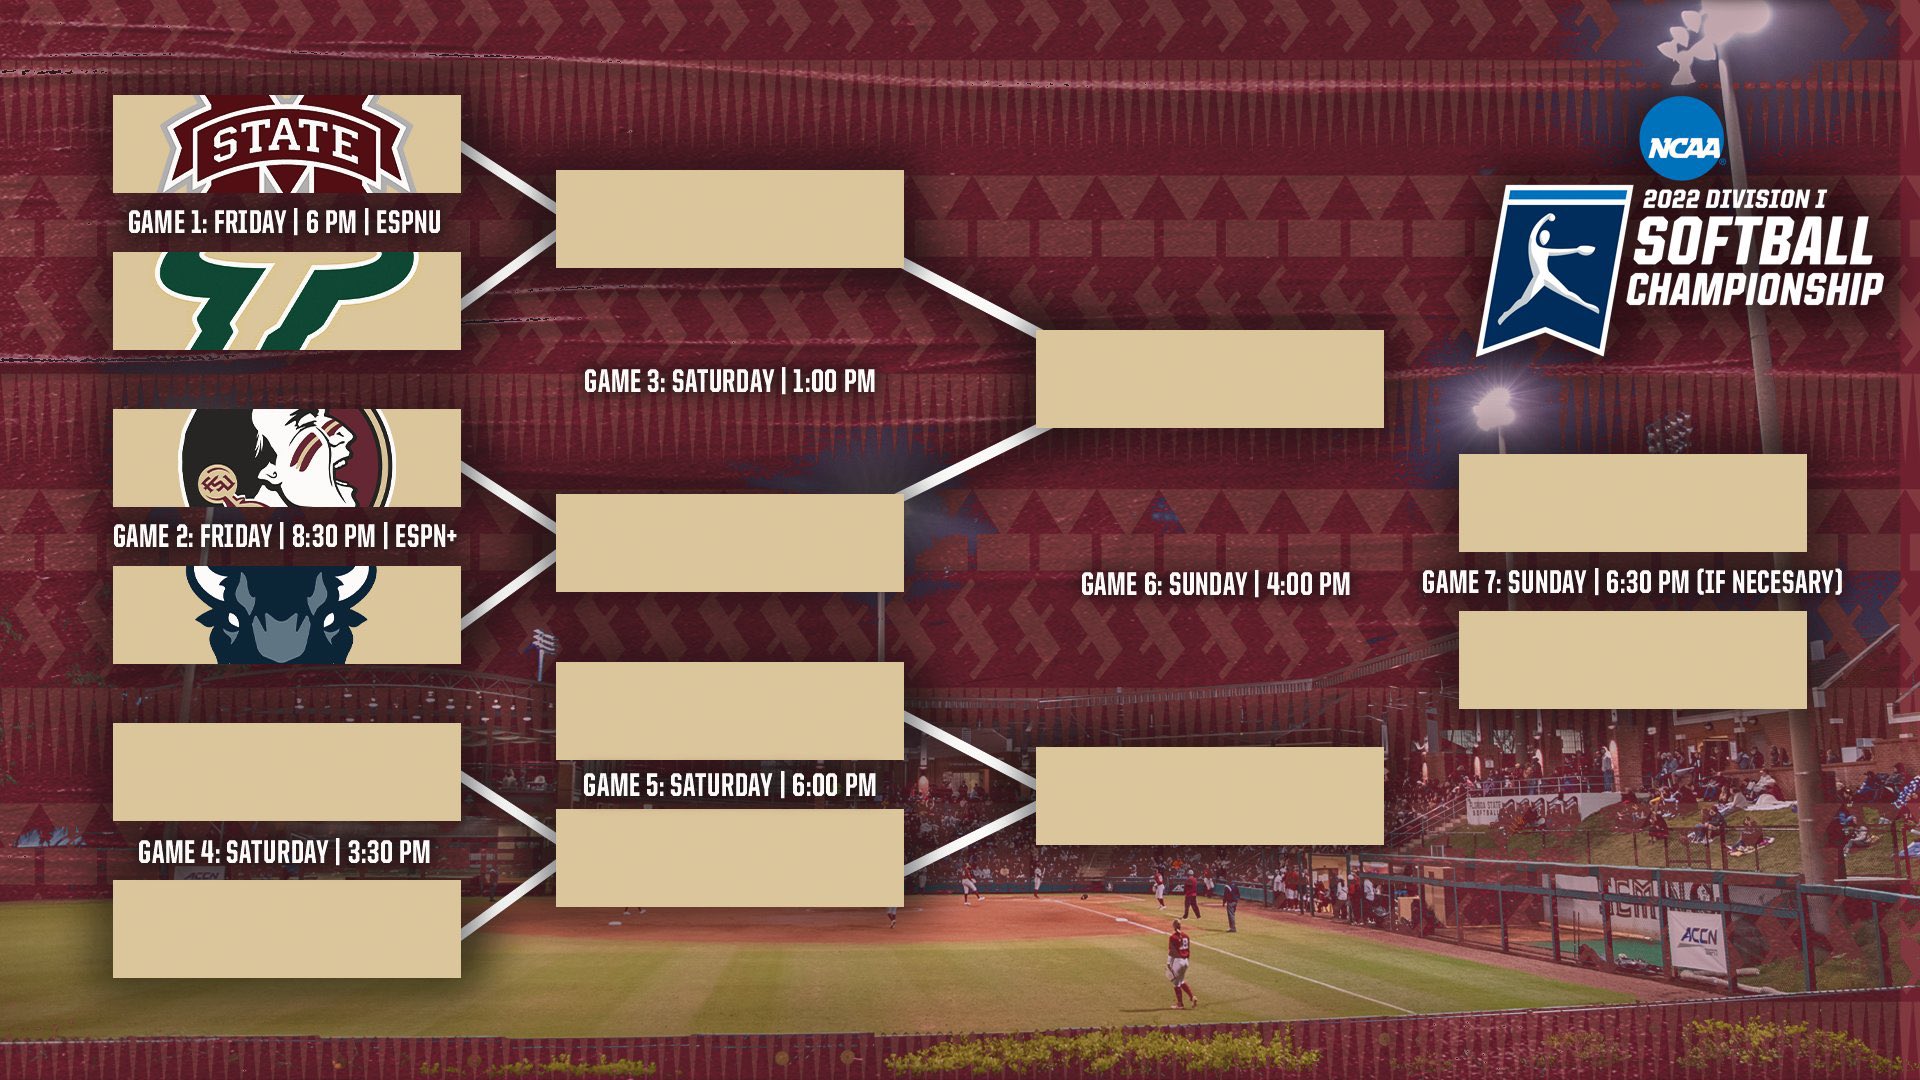 Florida State Softball 🥎 on Twitter: "Check out the schedule for this weekend’s Tallahassee